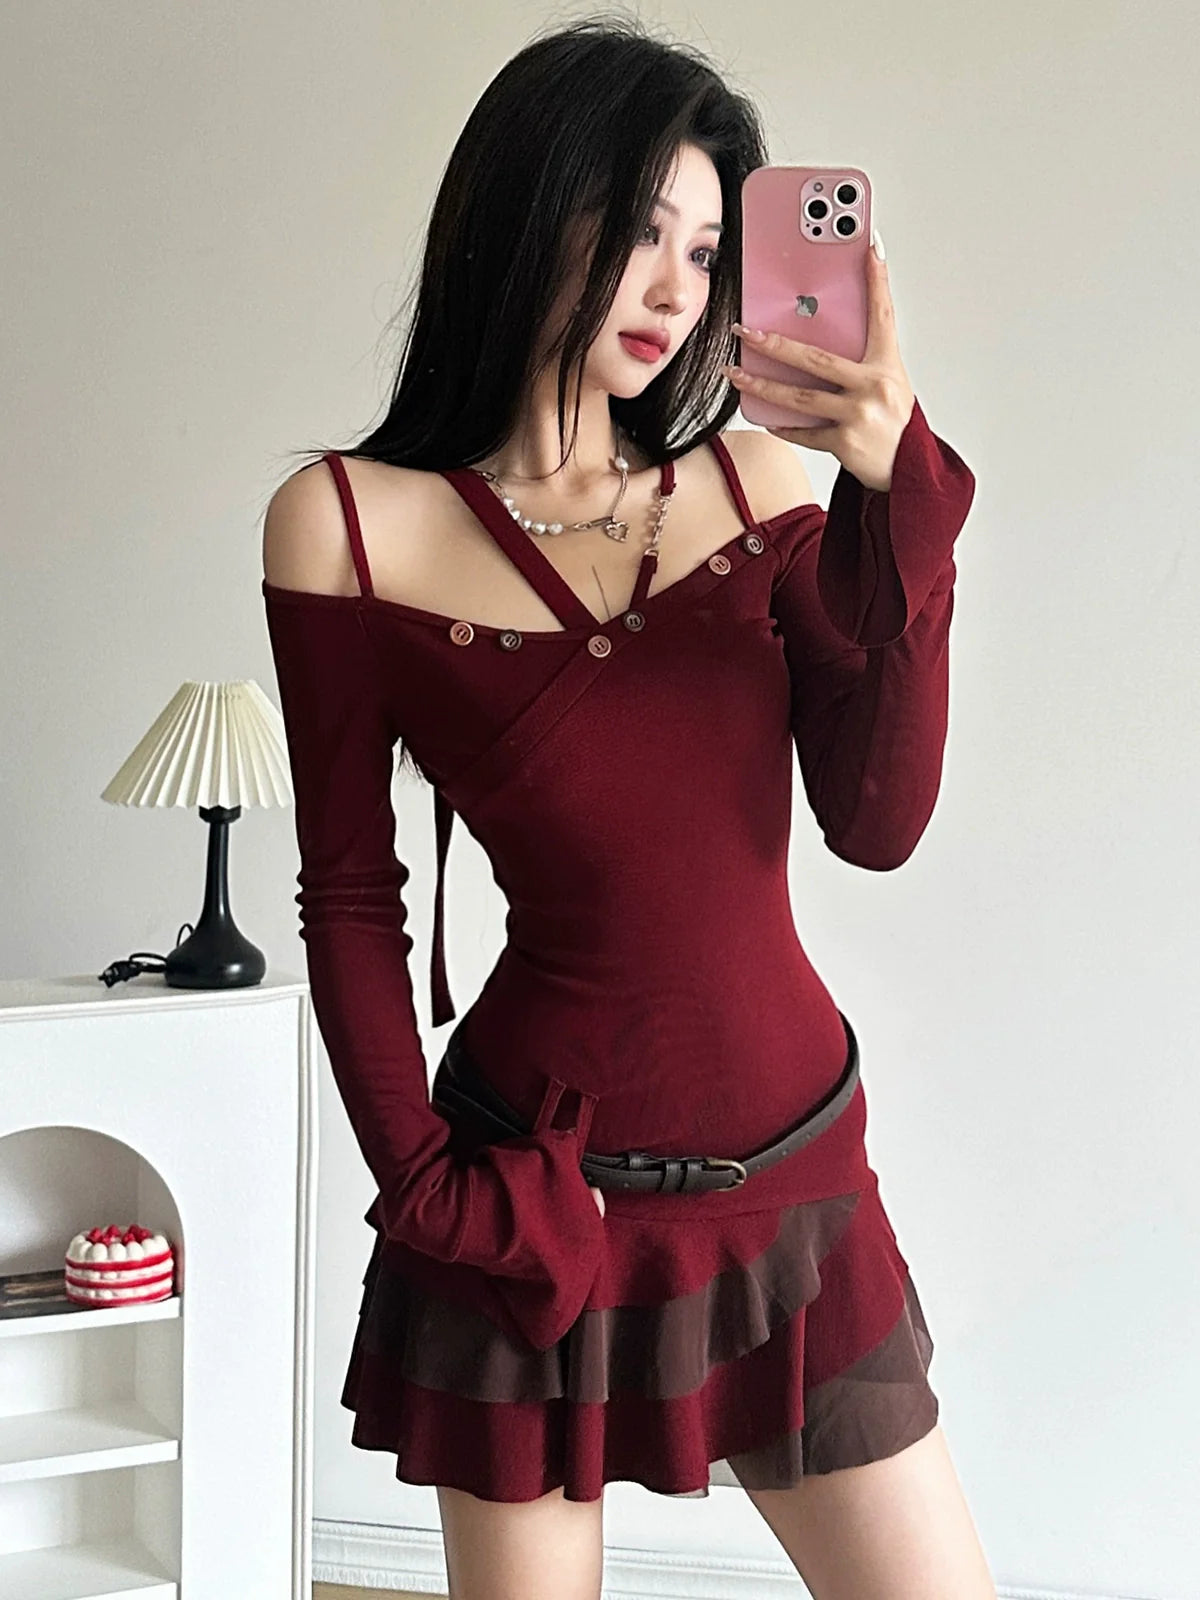 Sensual Red Halterneck Dress: Chic Winter Elegance for Young Women